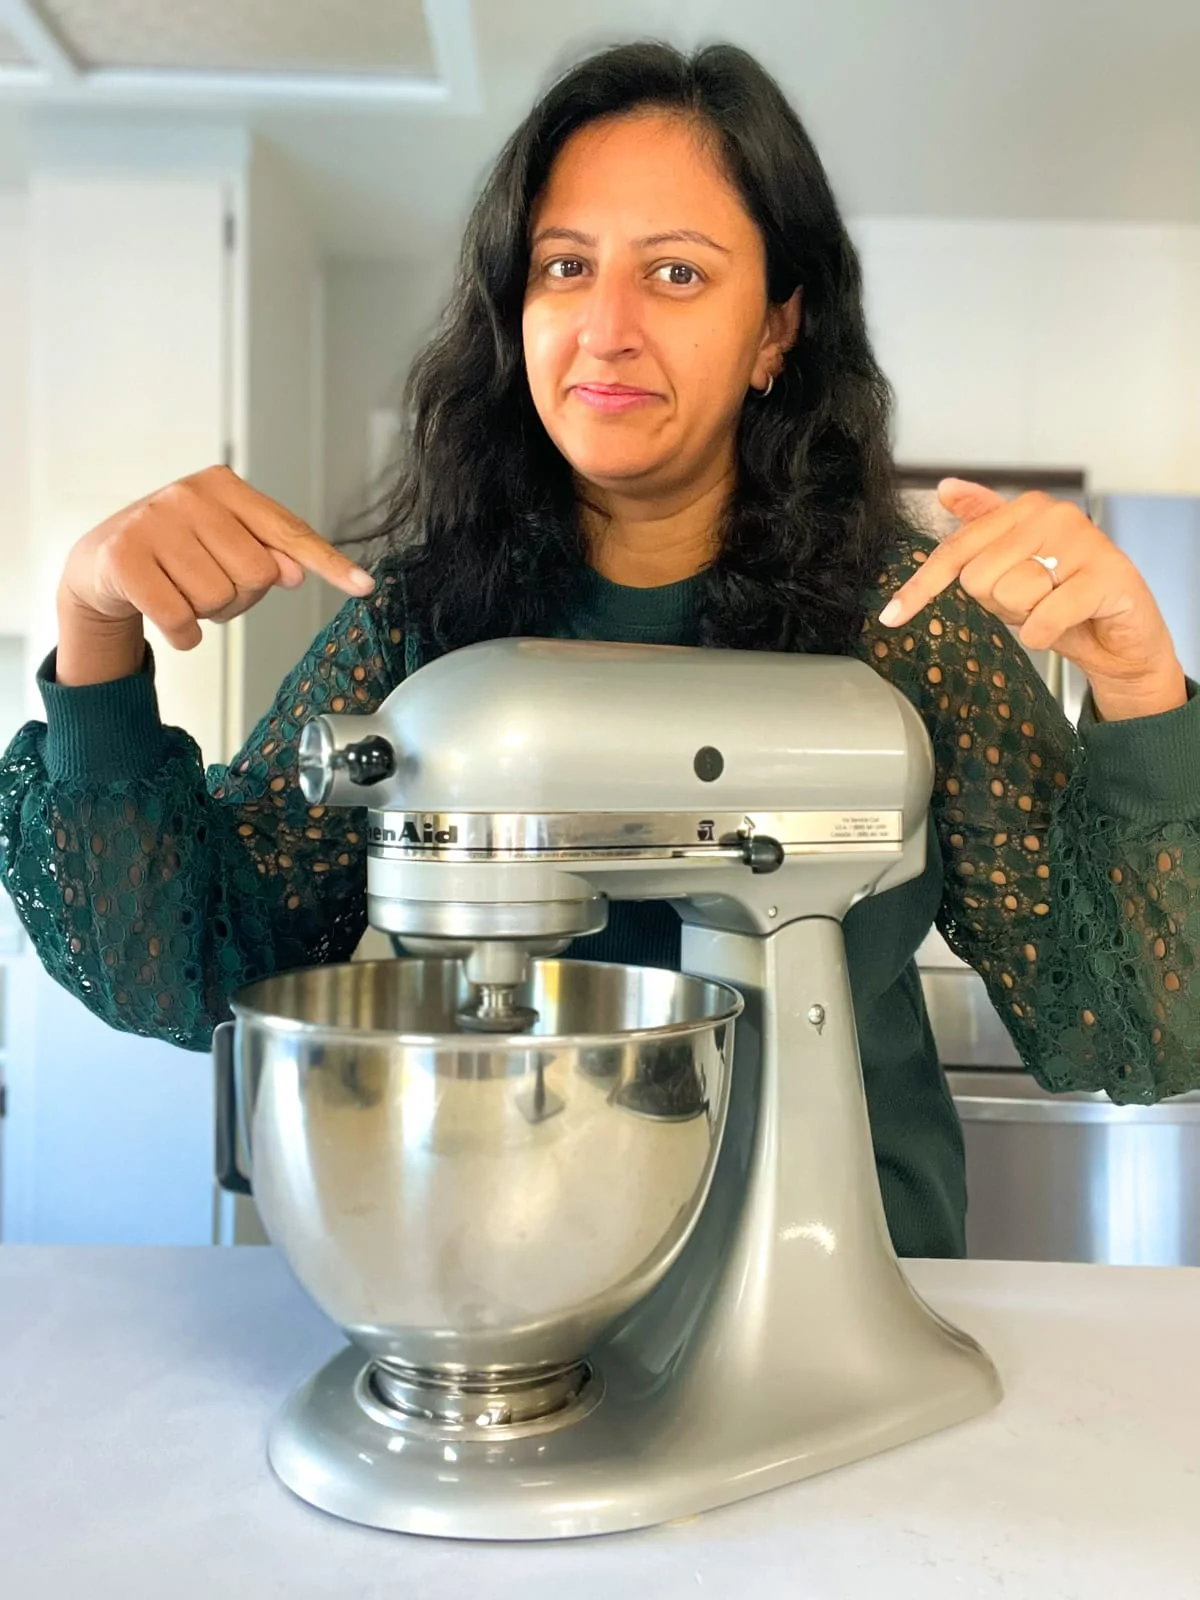 Kitchenaid Stand Mixer to Buy: Easy Guide for Beginners - Piping Pot